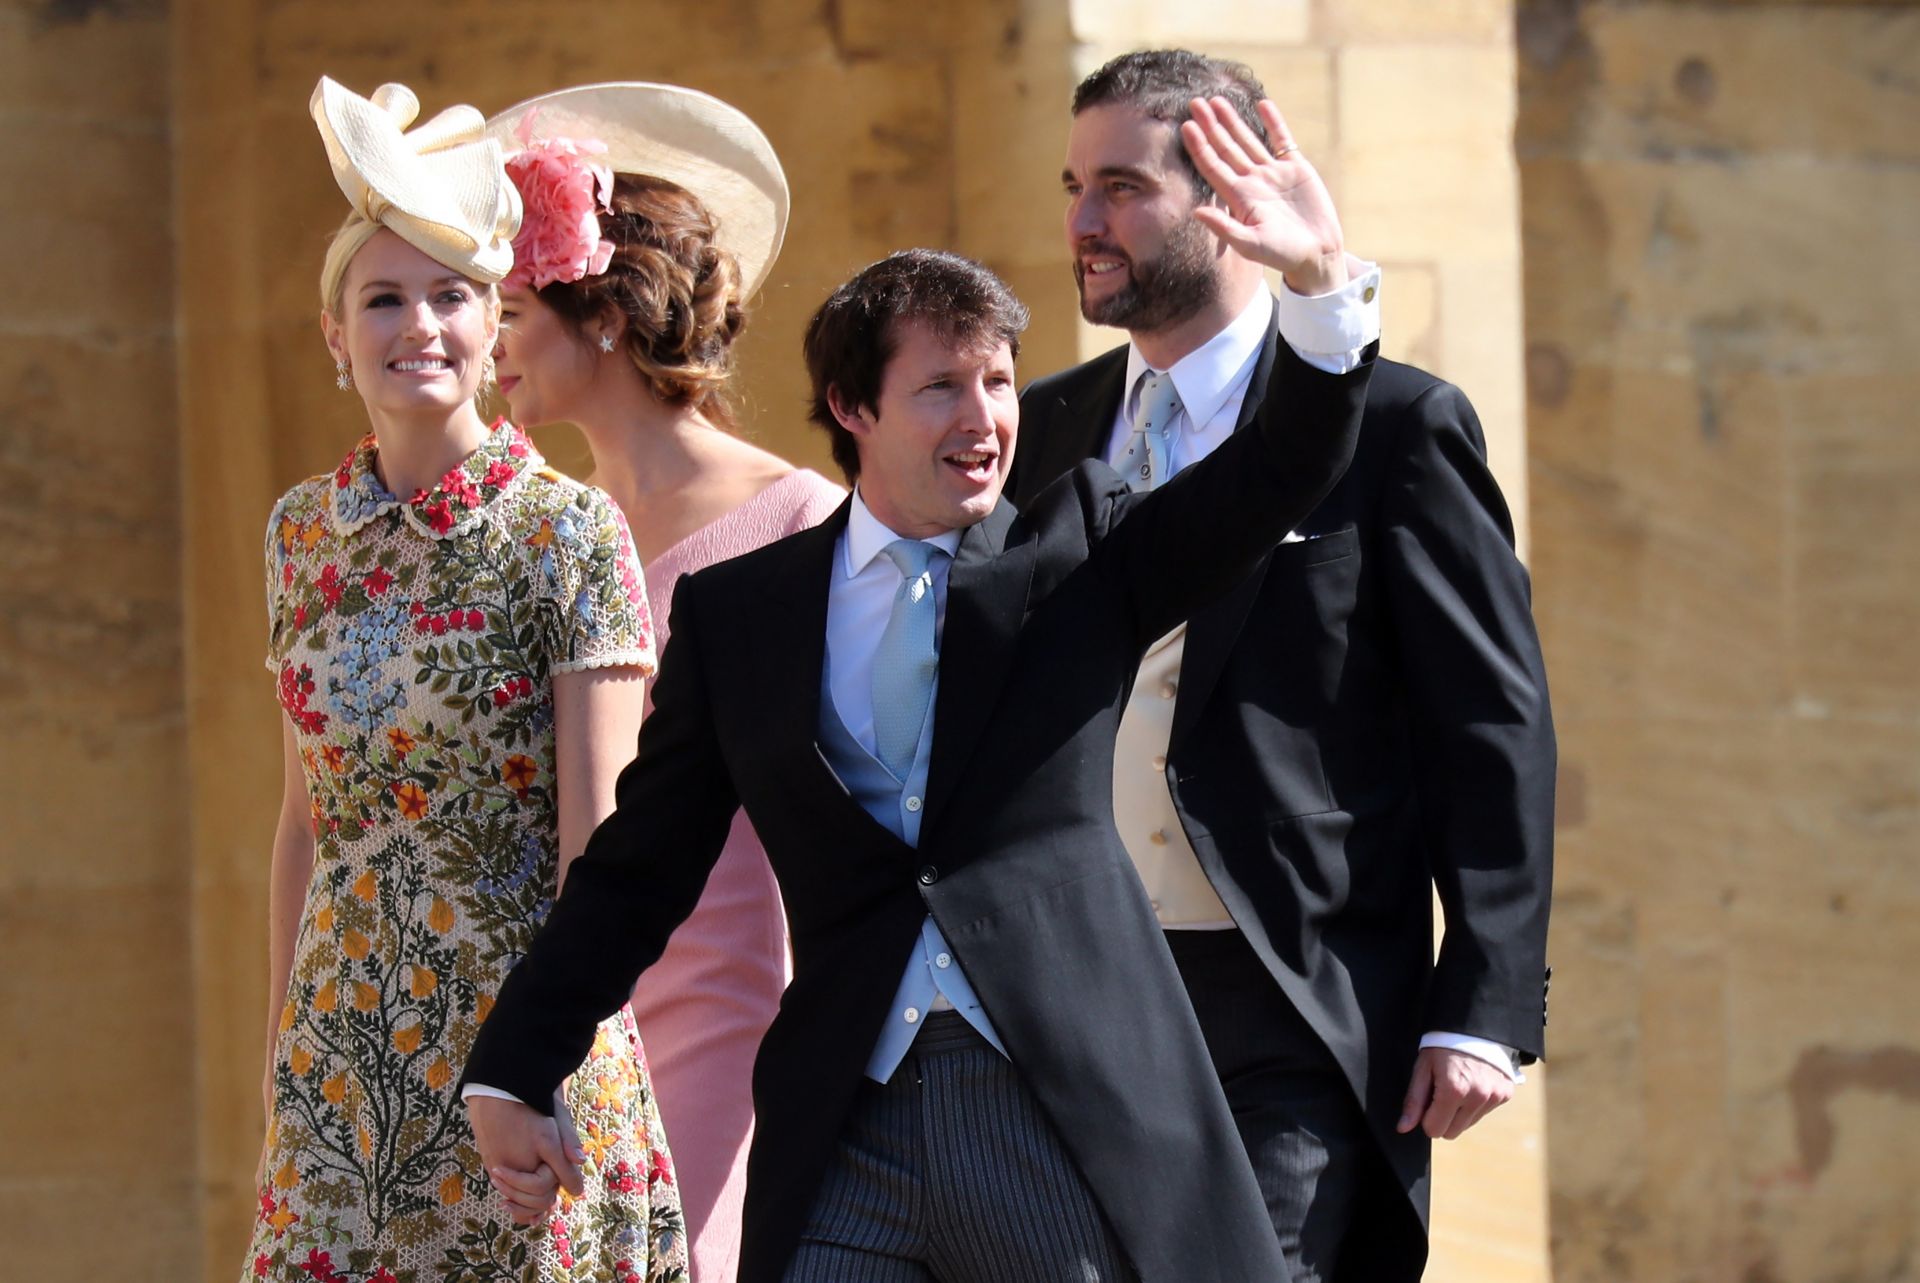 James Blunt (C) and Sofia Wellesley arrive for the royal wedding ceremony of Prince Harry and Meghan Markle at St George's Chapel in Windsor Castle